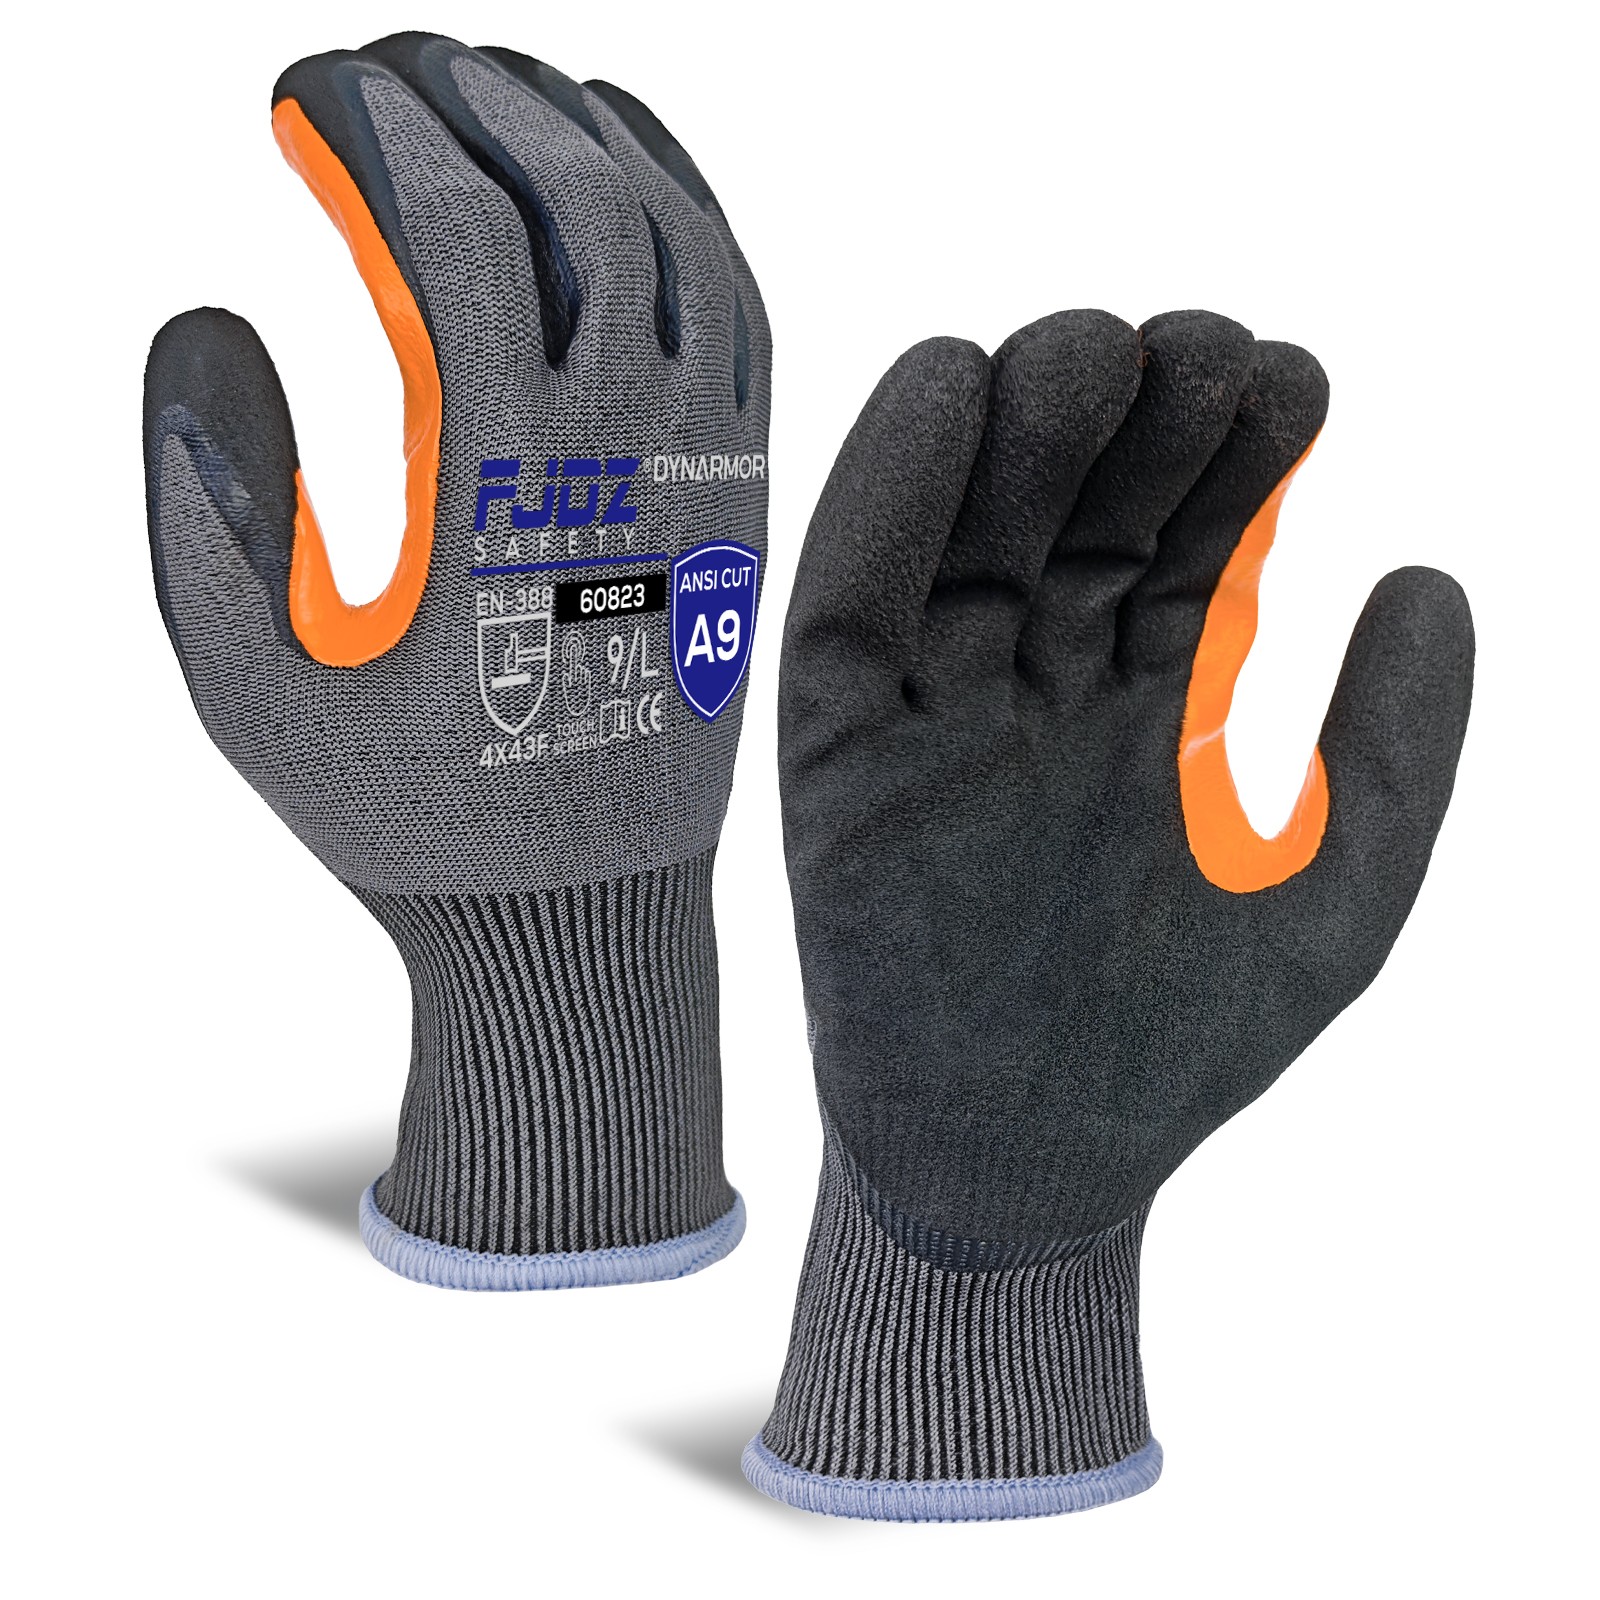 18G Nitrile Dipped Touch Screen A9 Cut Resistant Glove with Thumb Crotch Reinforced/60823